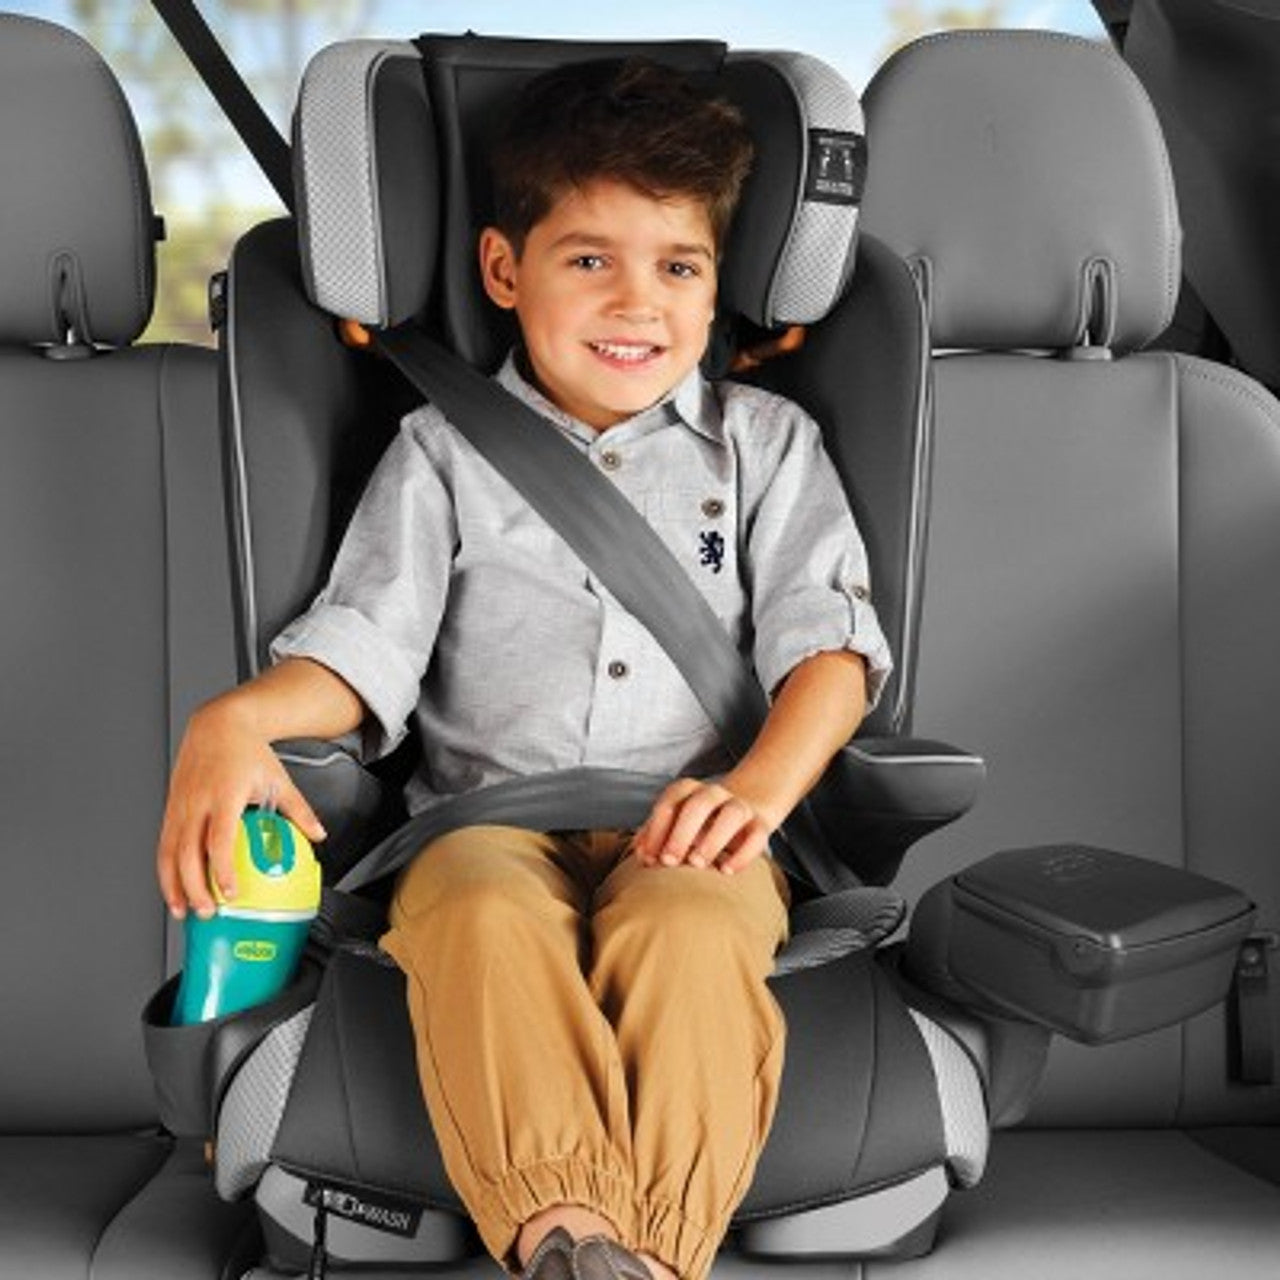 New - Chicco MyFit Zip Air Harness Booster Car Seat - Q Collection